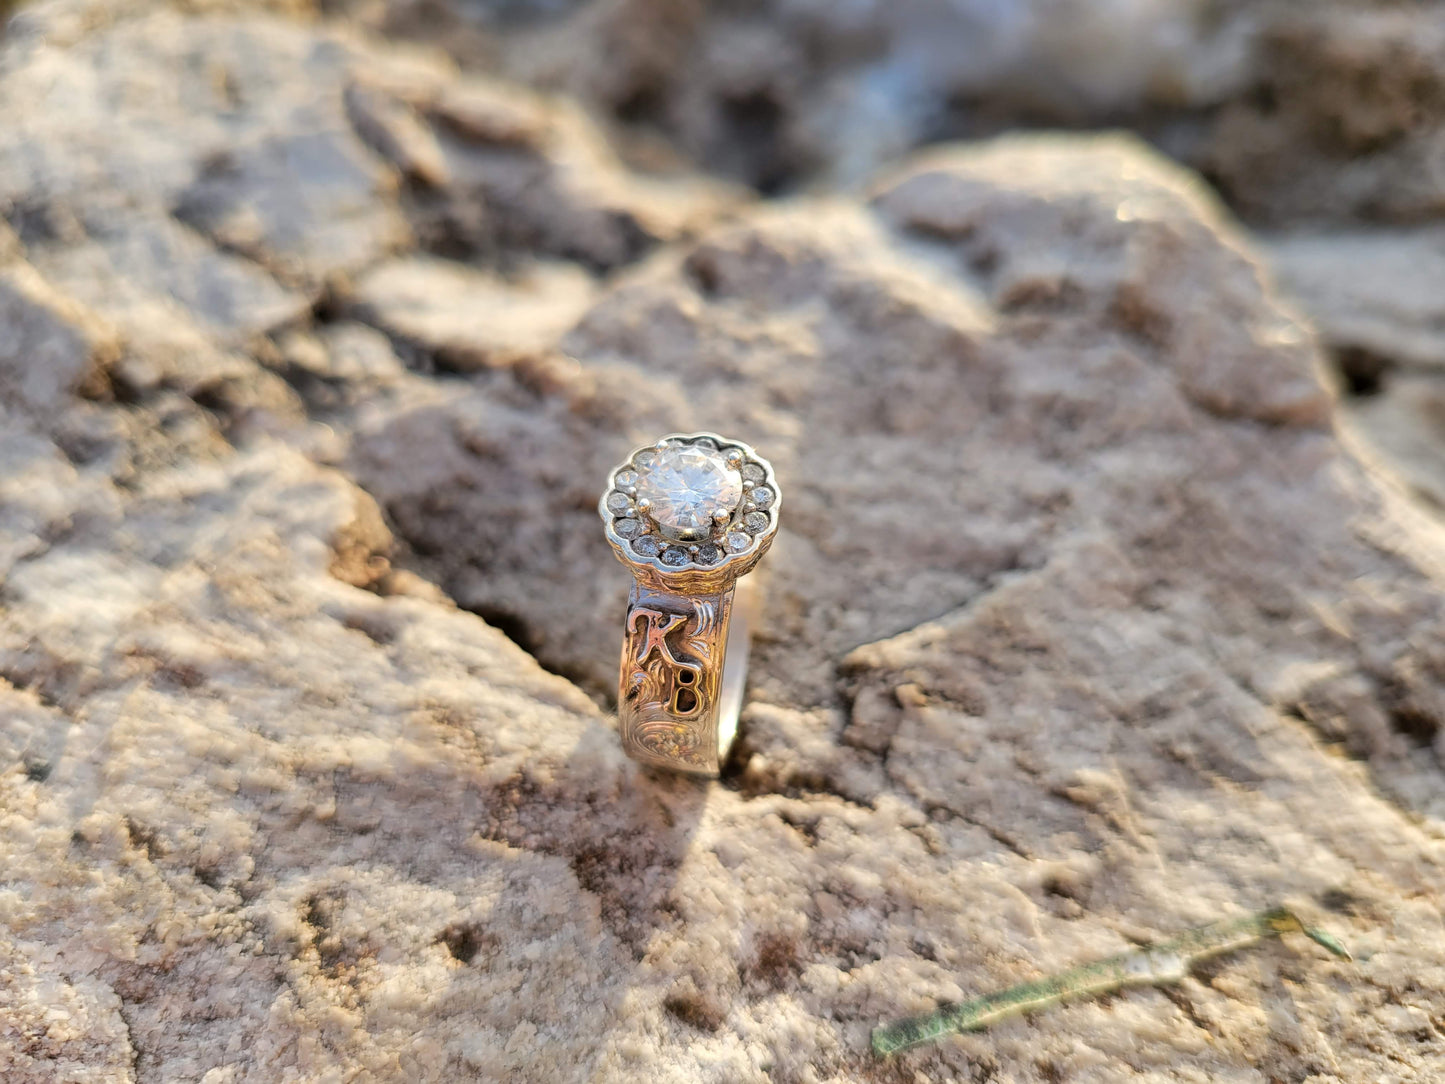 The Brittany: Sterling silver or white gold engagement ring with round halo, Beautiful Western Engagement Ring, Unique Cowgirl Engagement Ring